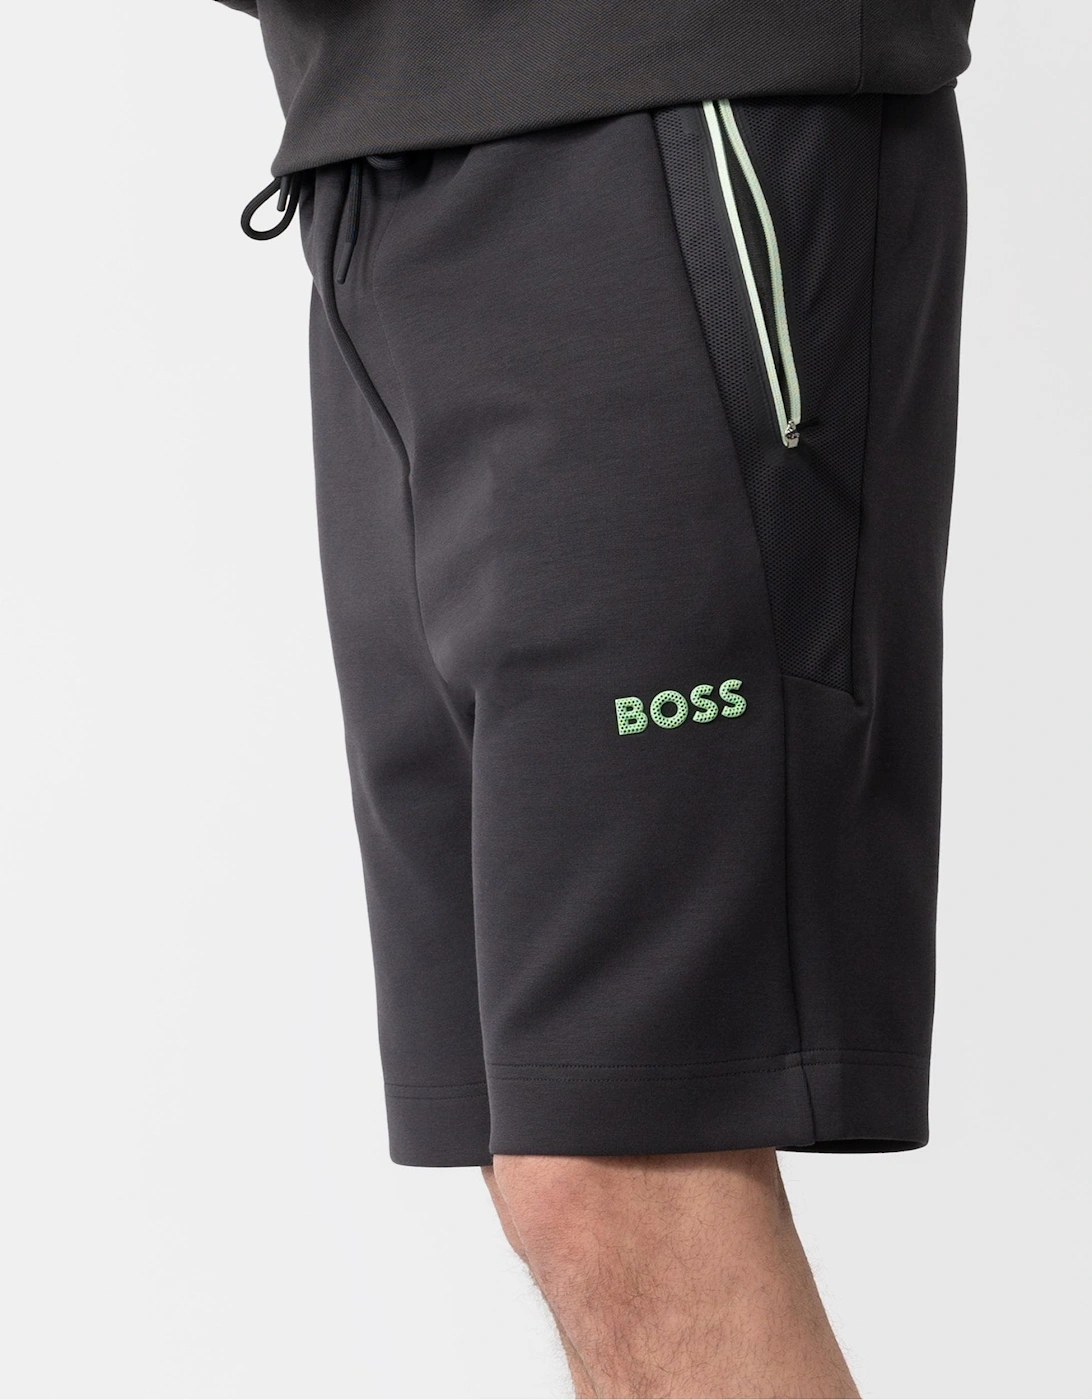 BOSS Green Headlo 1 Mens Cotton-Blend Shorts with 3D-Moulded Logo